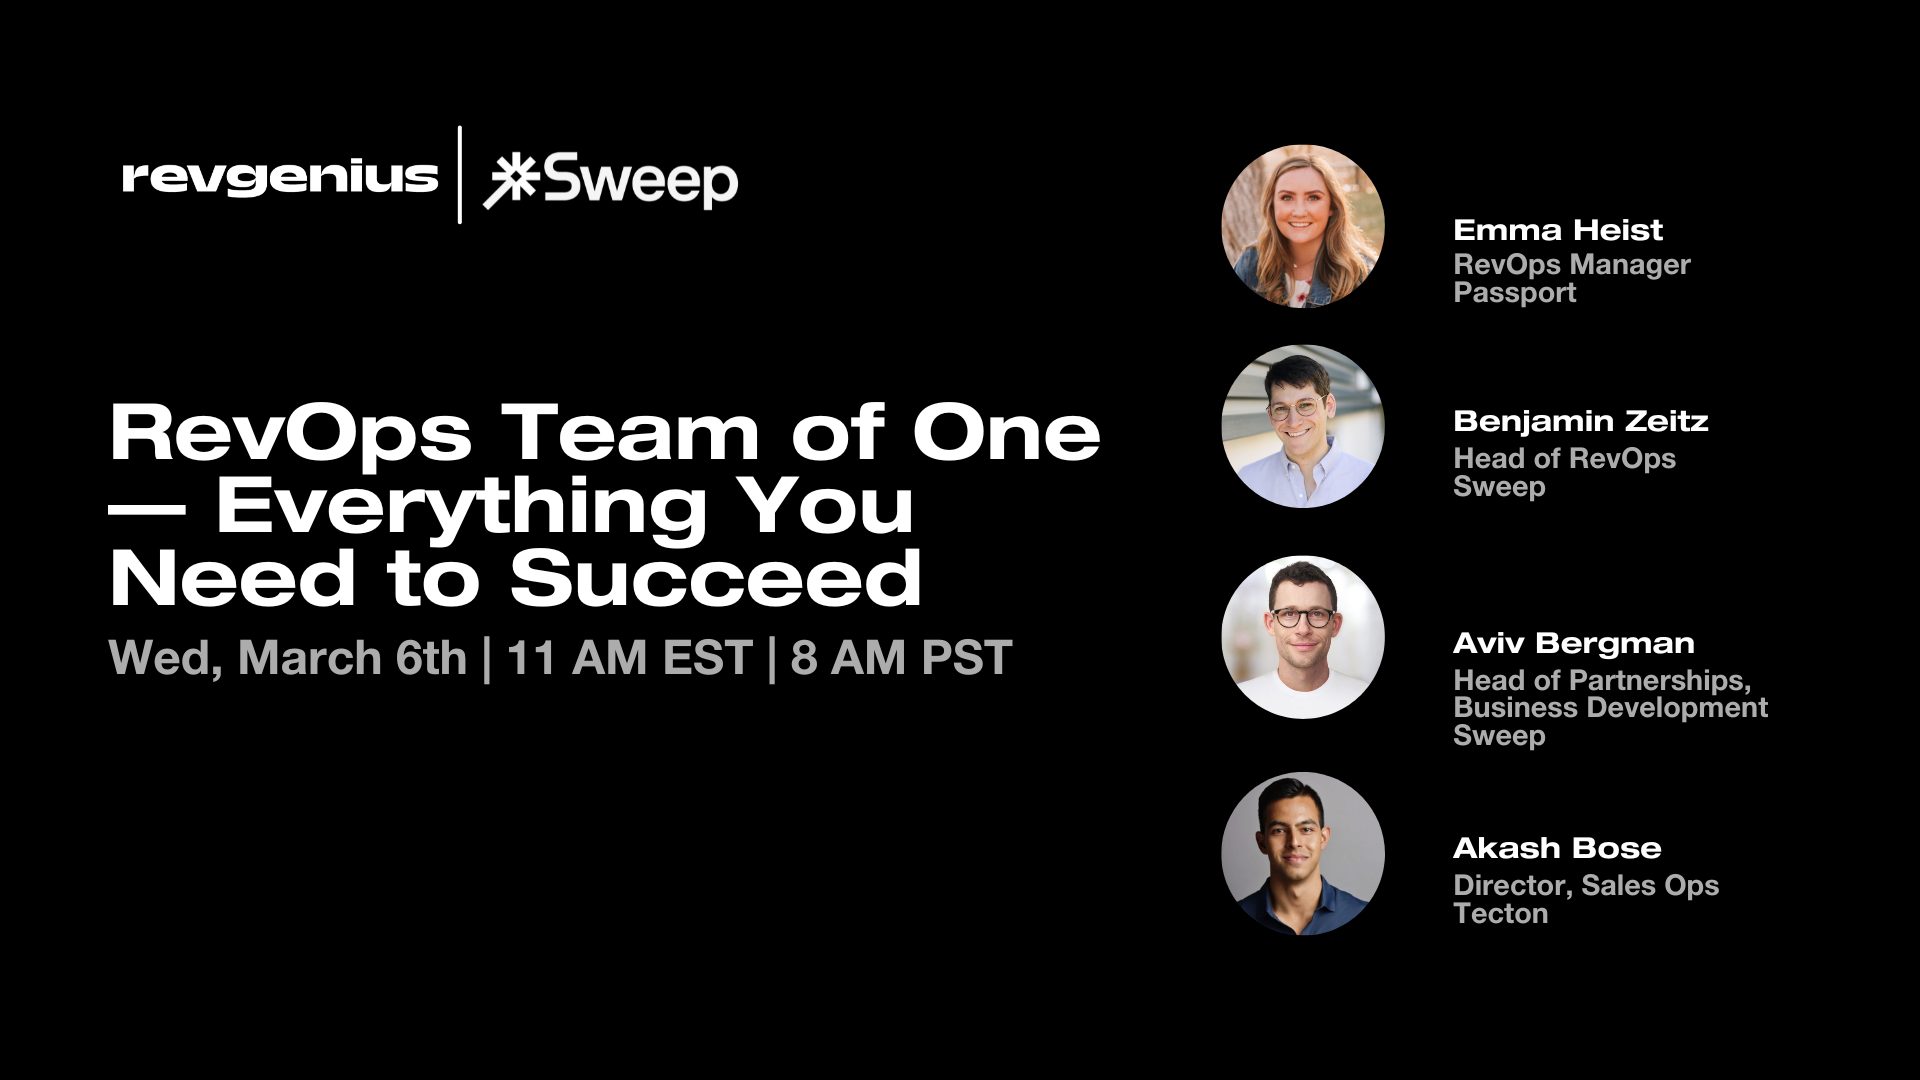 RevOps Team of One — Everything You Need to Succeed